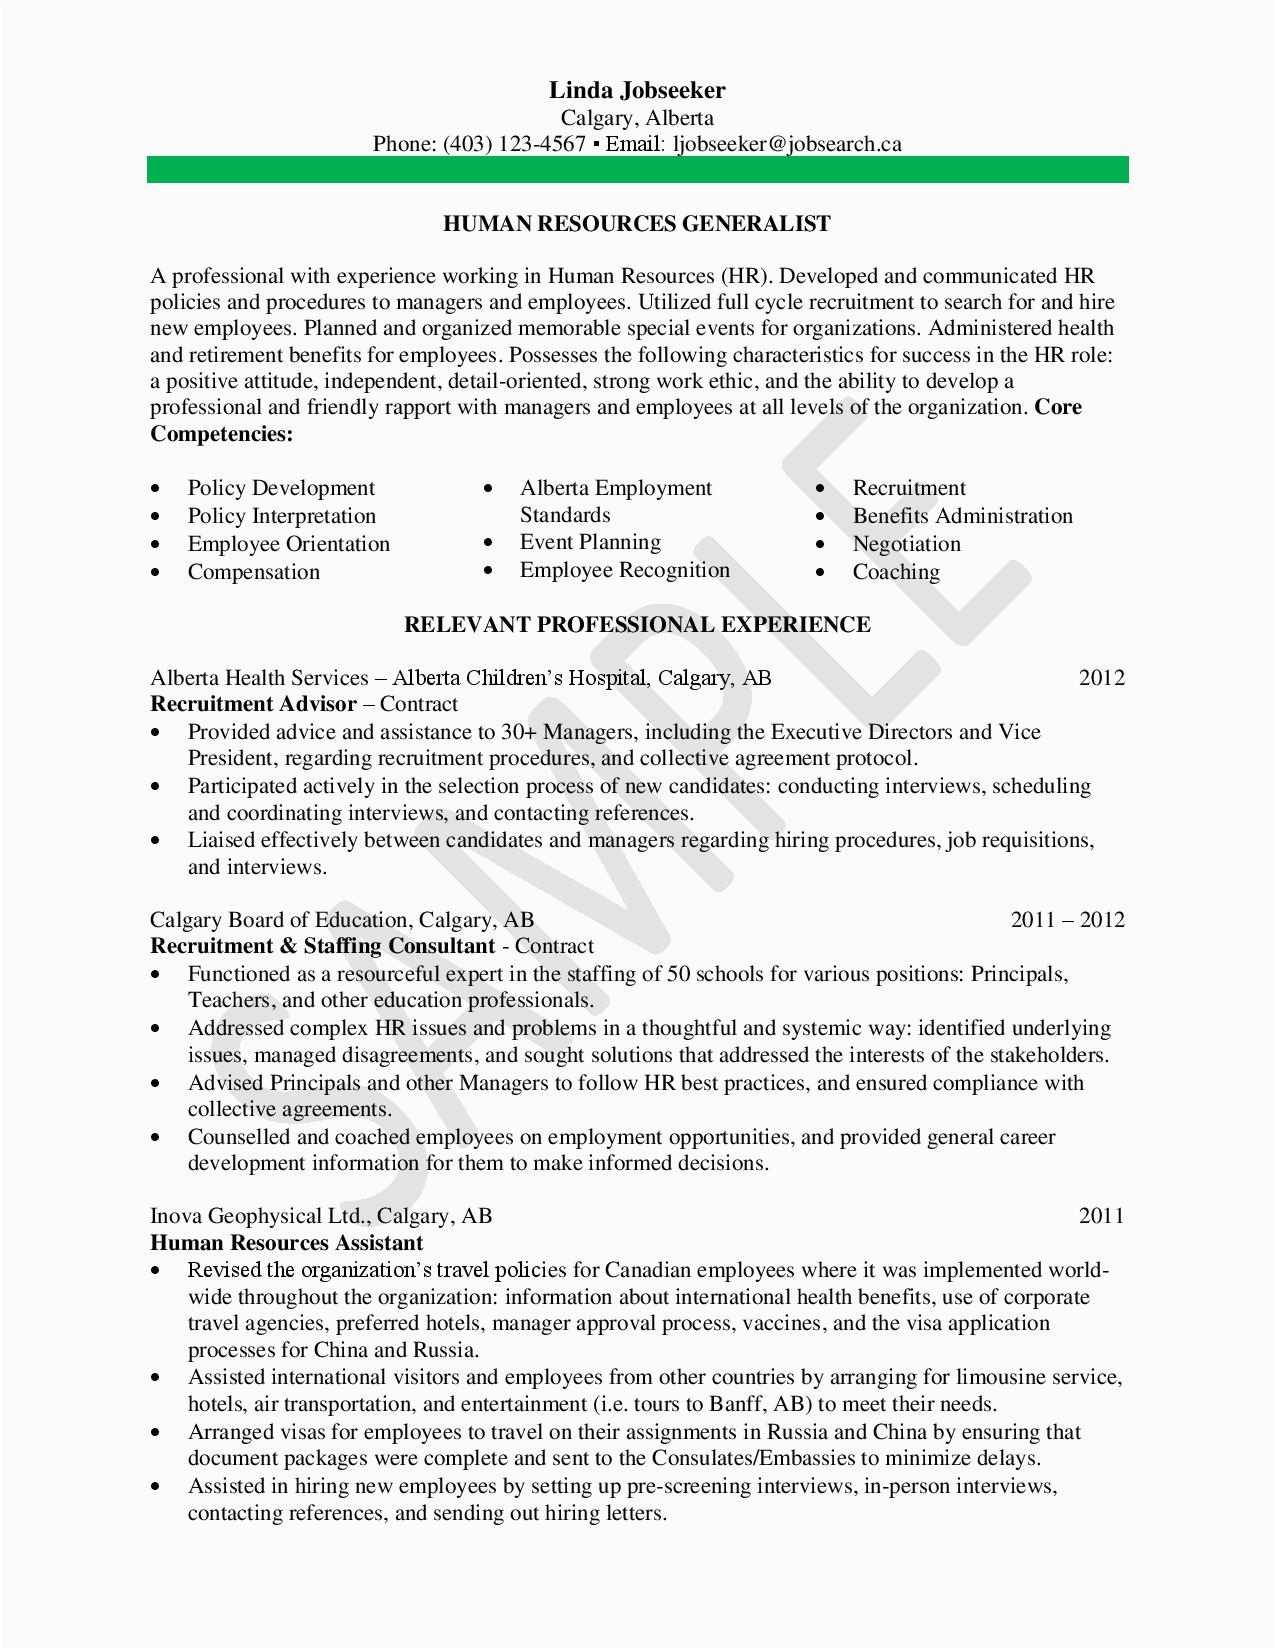 human resources generalist resume page 001